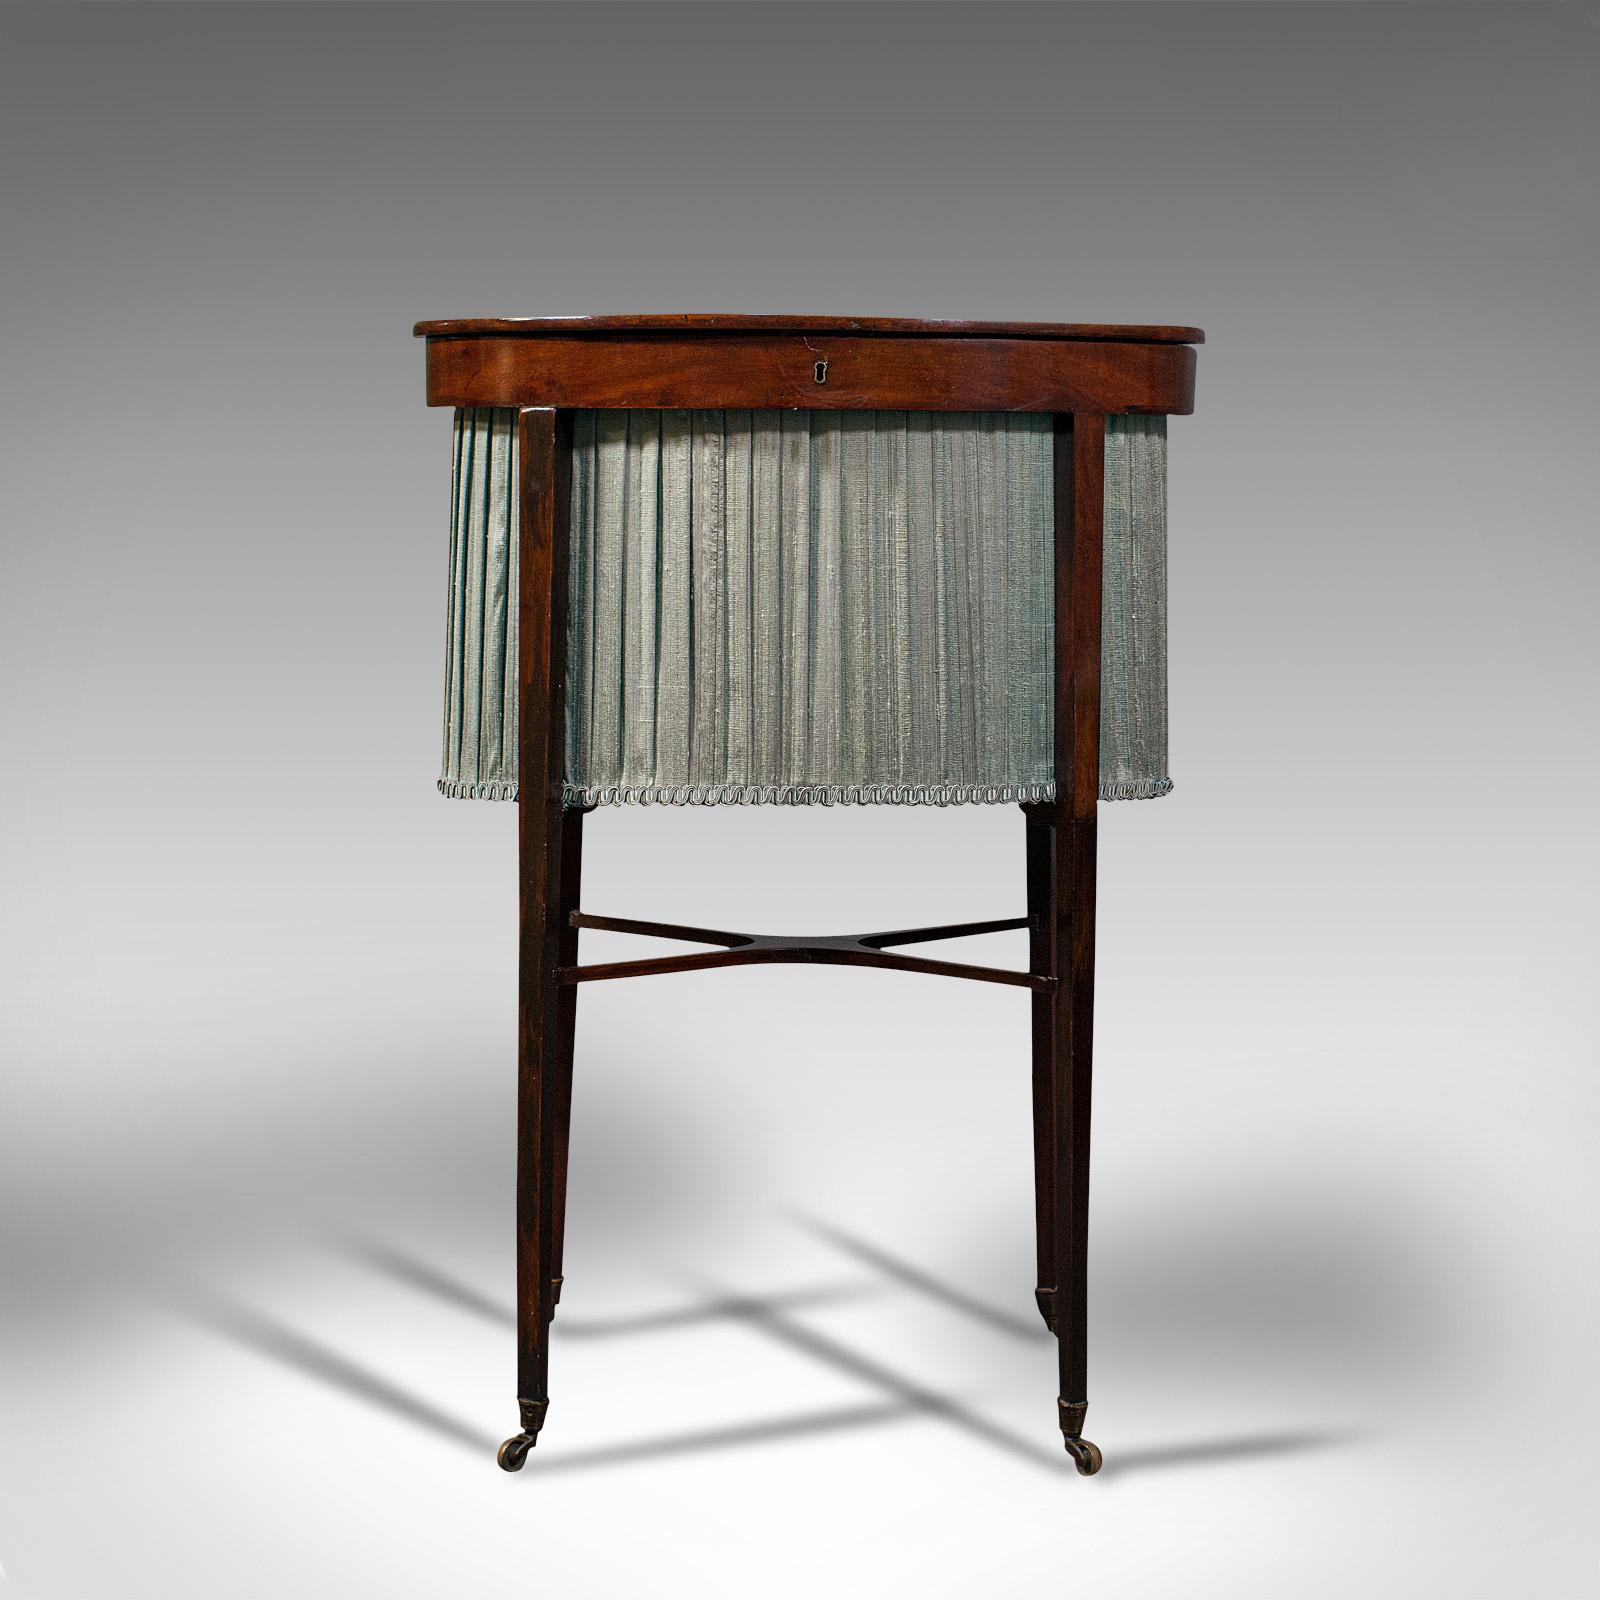 This is an antique sewing table. An English, mahogany and silk cotton ladies work table, dating to the Regency period, circa 1820.

Elegantly dressed sewing table from the Regency period
Displays a desirable aged patina and in good order
Select